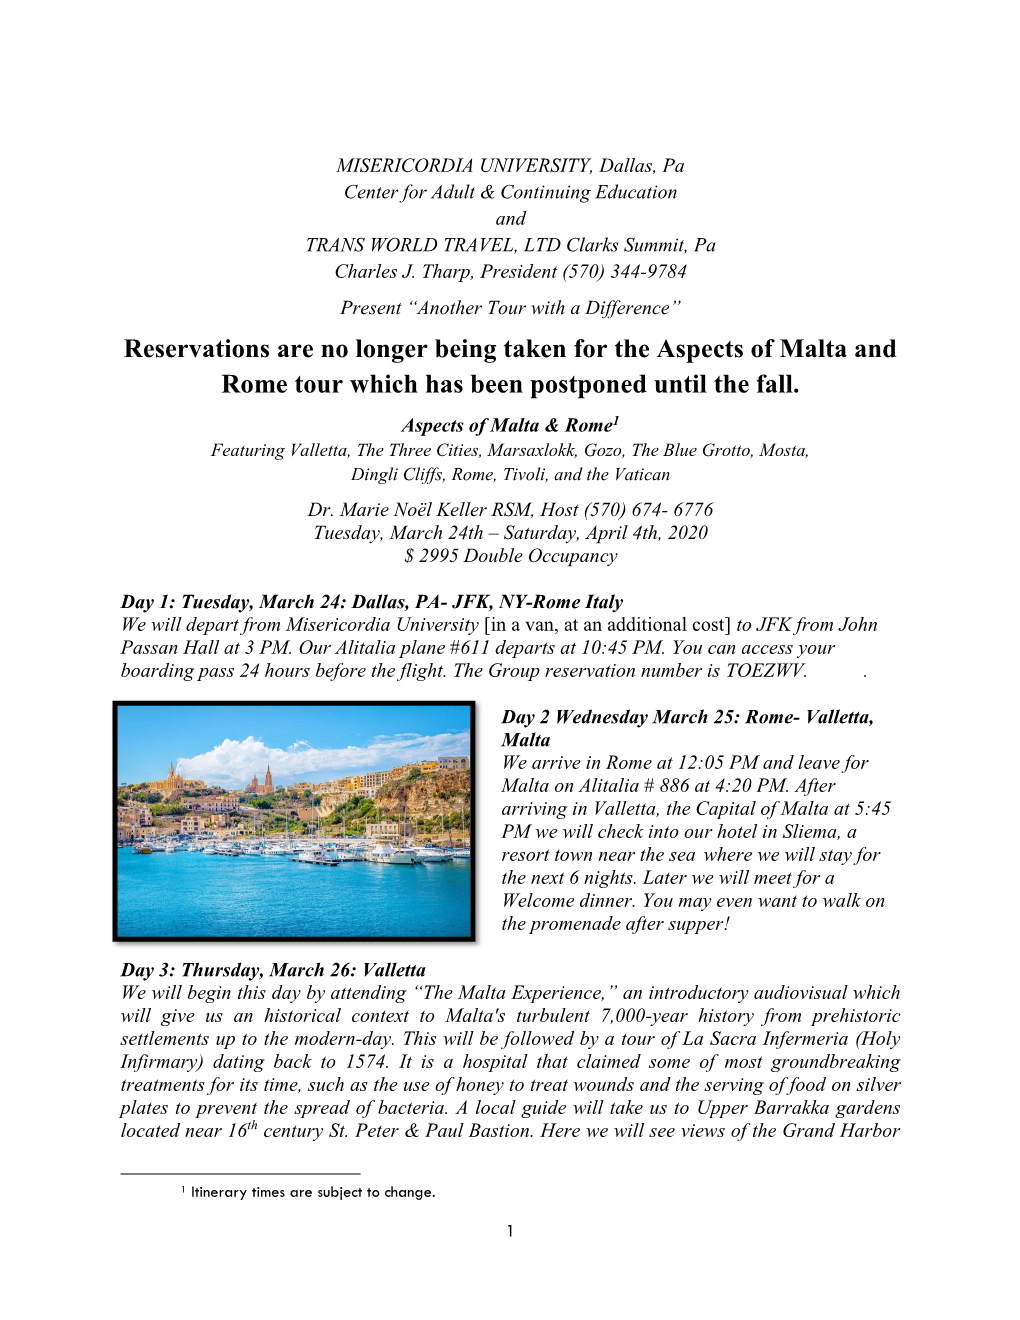 Reservations Are No Longer Being Taken for the Aspects of Malta and Rome Tour Which Has Been Postponed Until the Fall